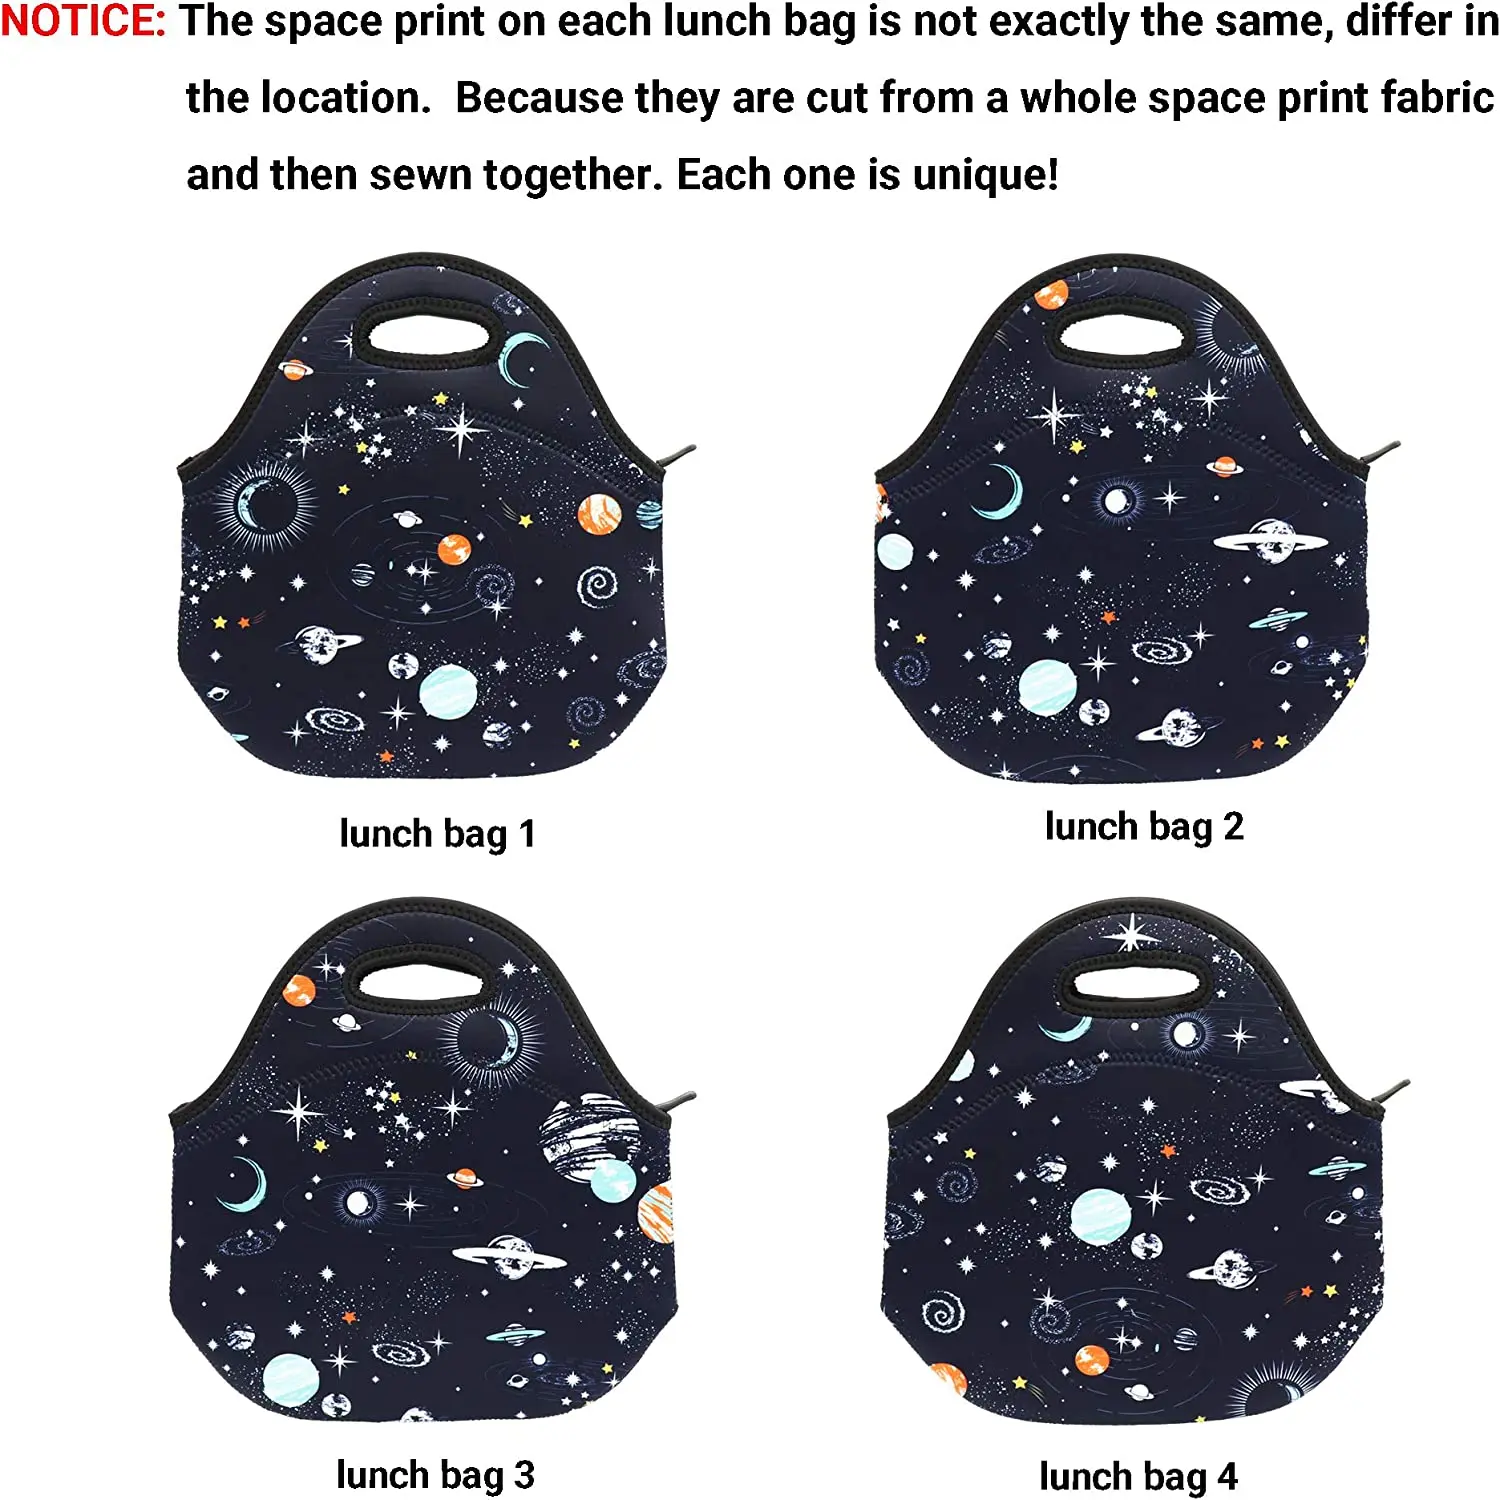 Neoprene Lunch Bag for Kids Insulated Lunch Box Tote for Women Men Adult Teens Boys Teenage Girls Toddlers Space planet images - 6